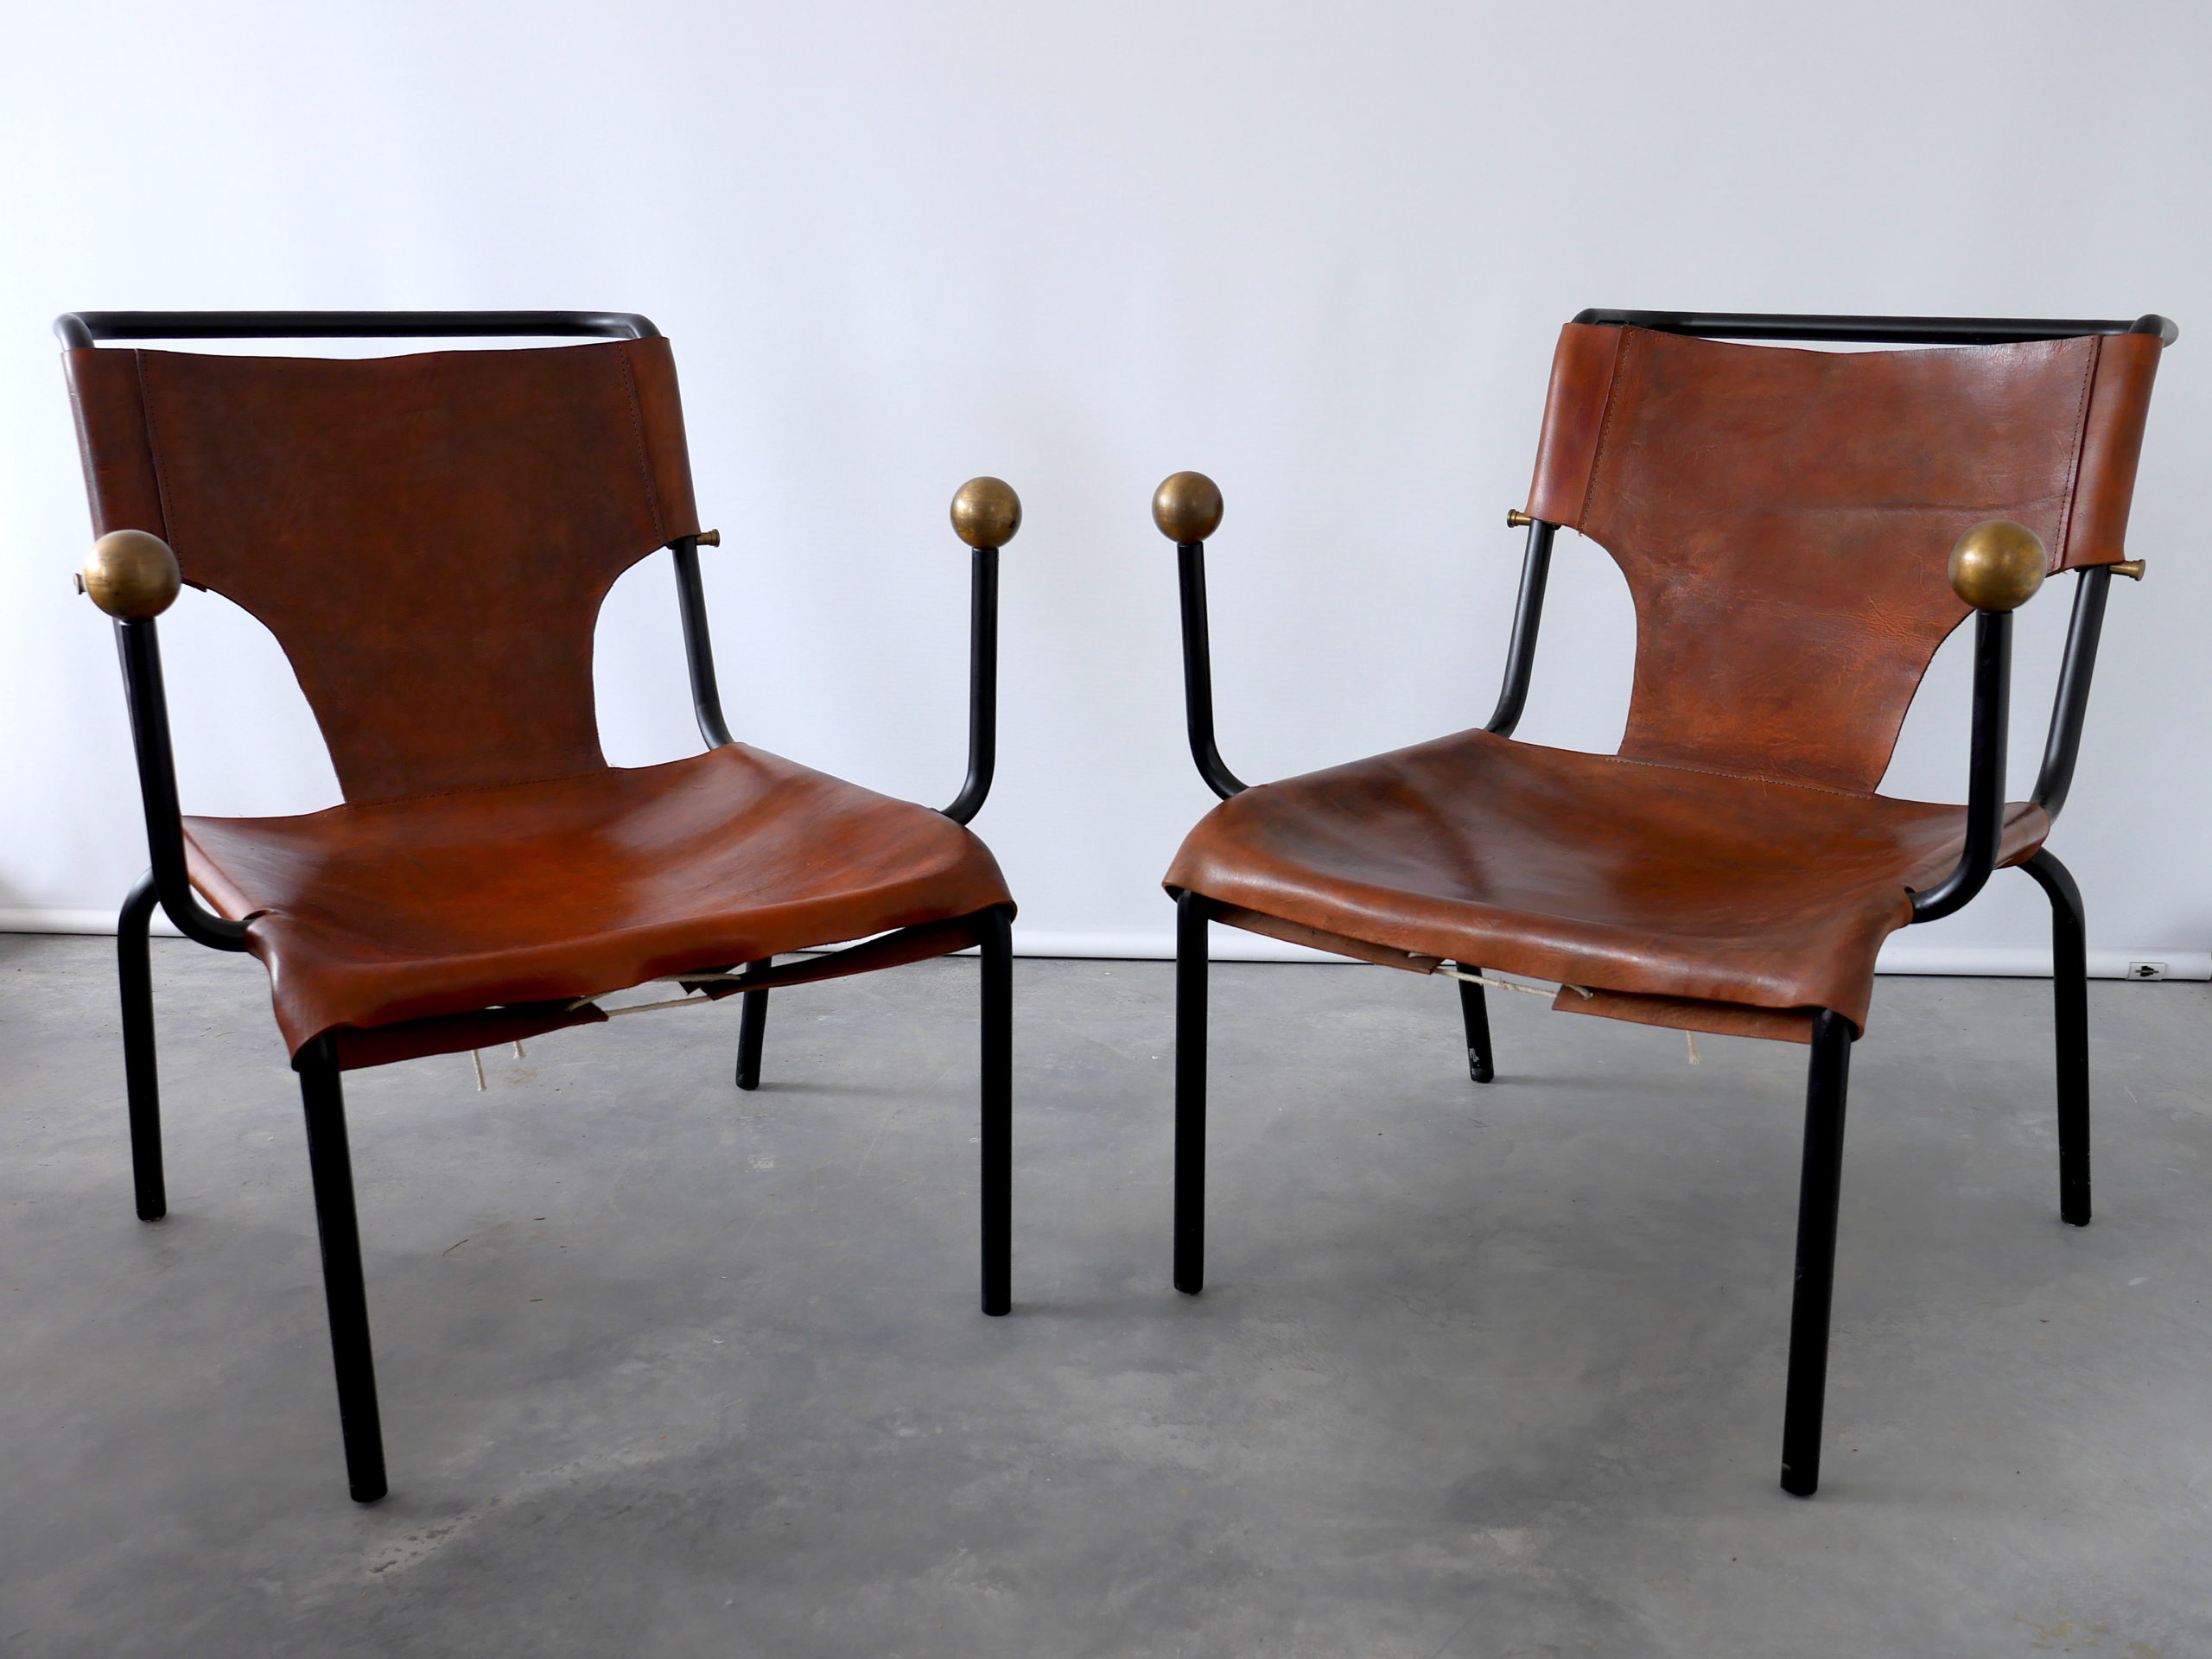 Two brown leather chairs